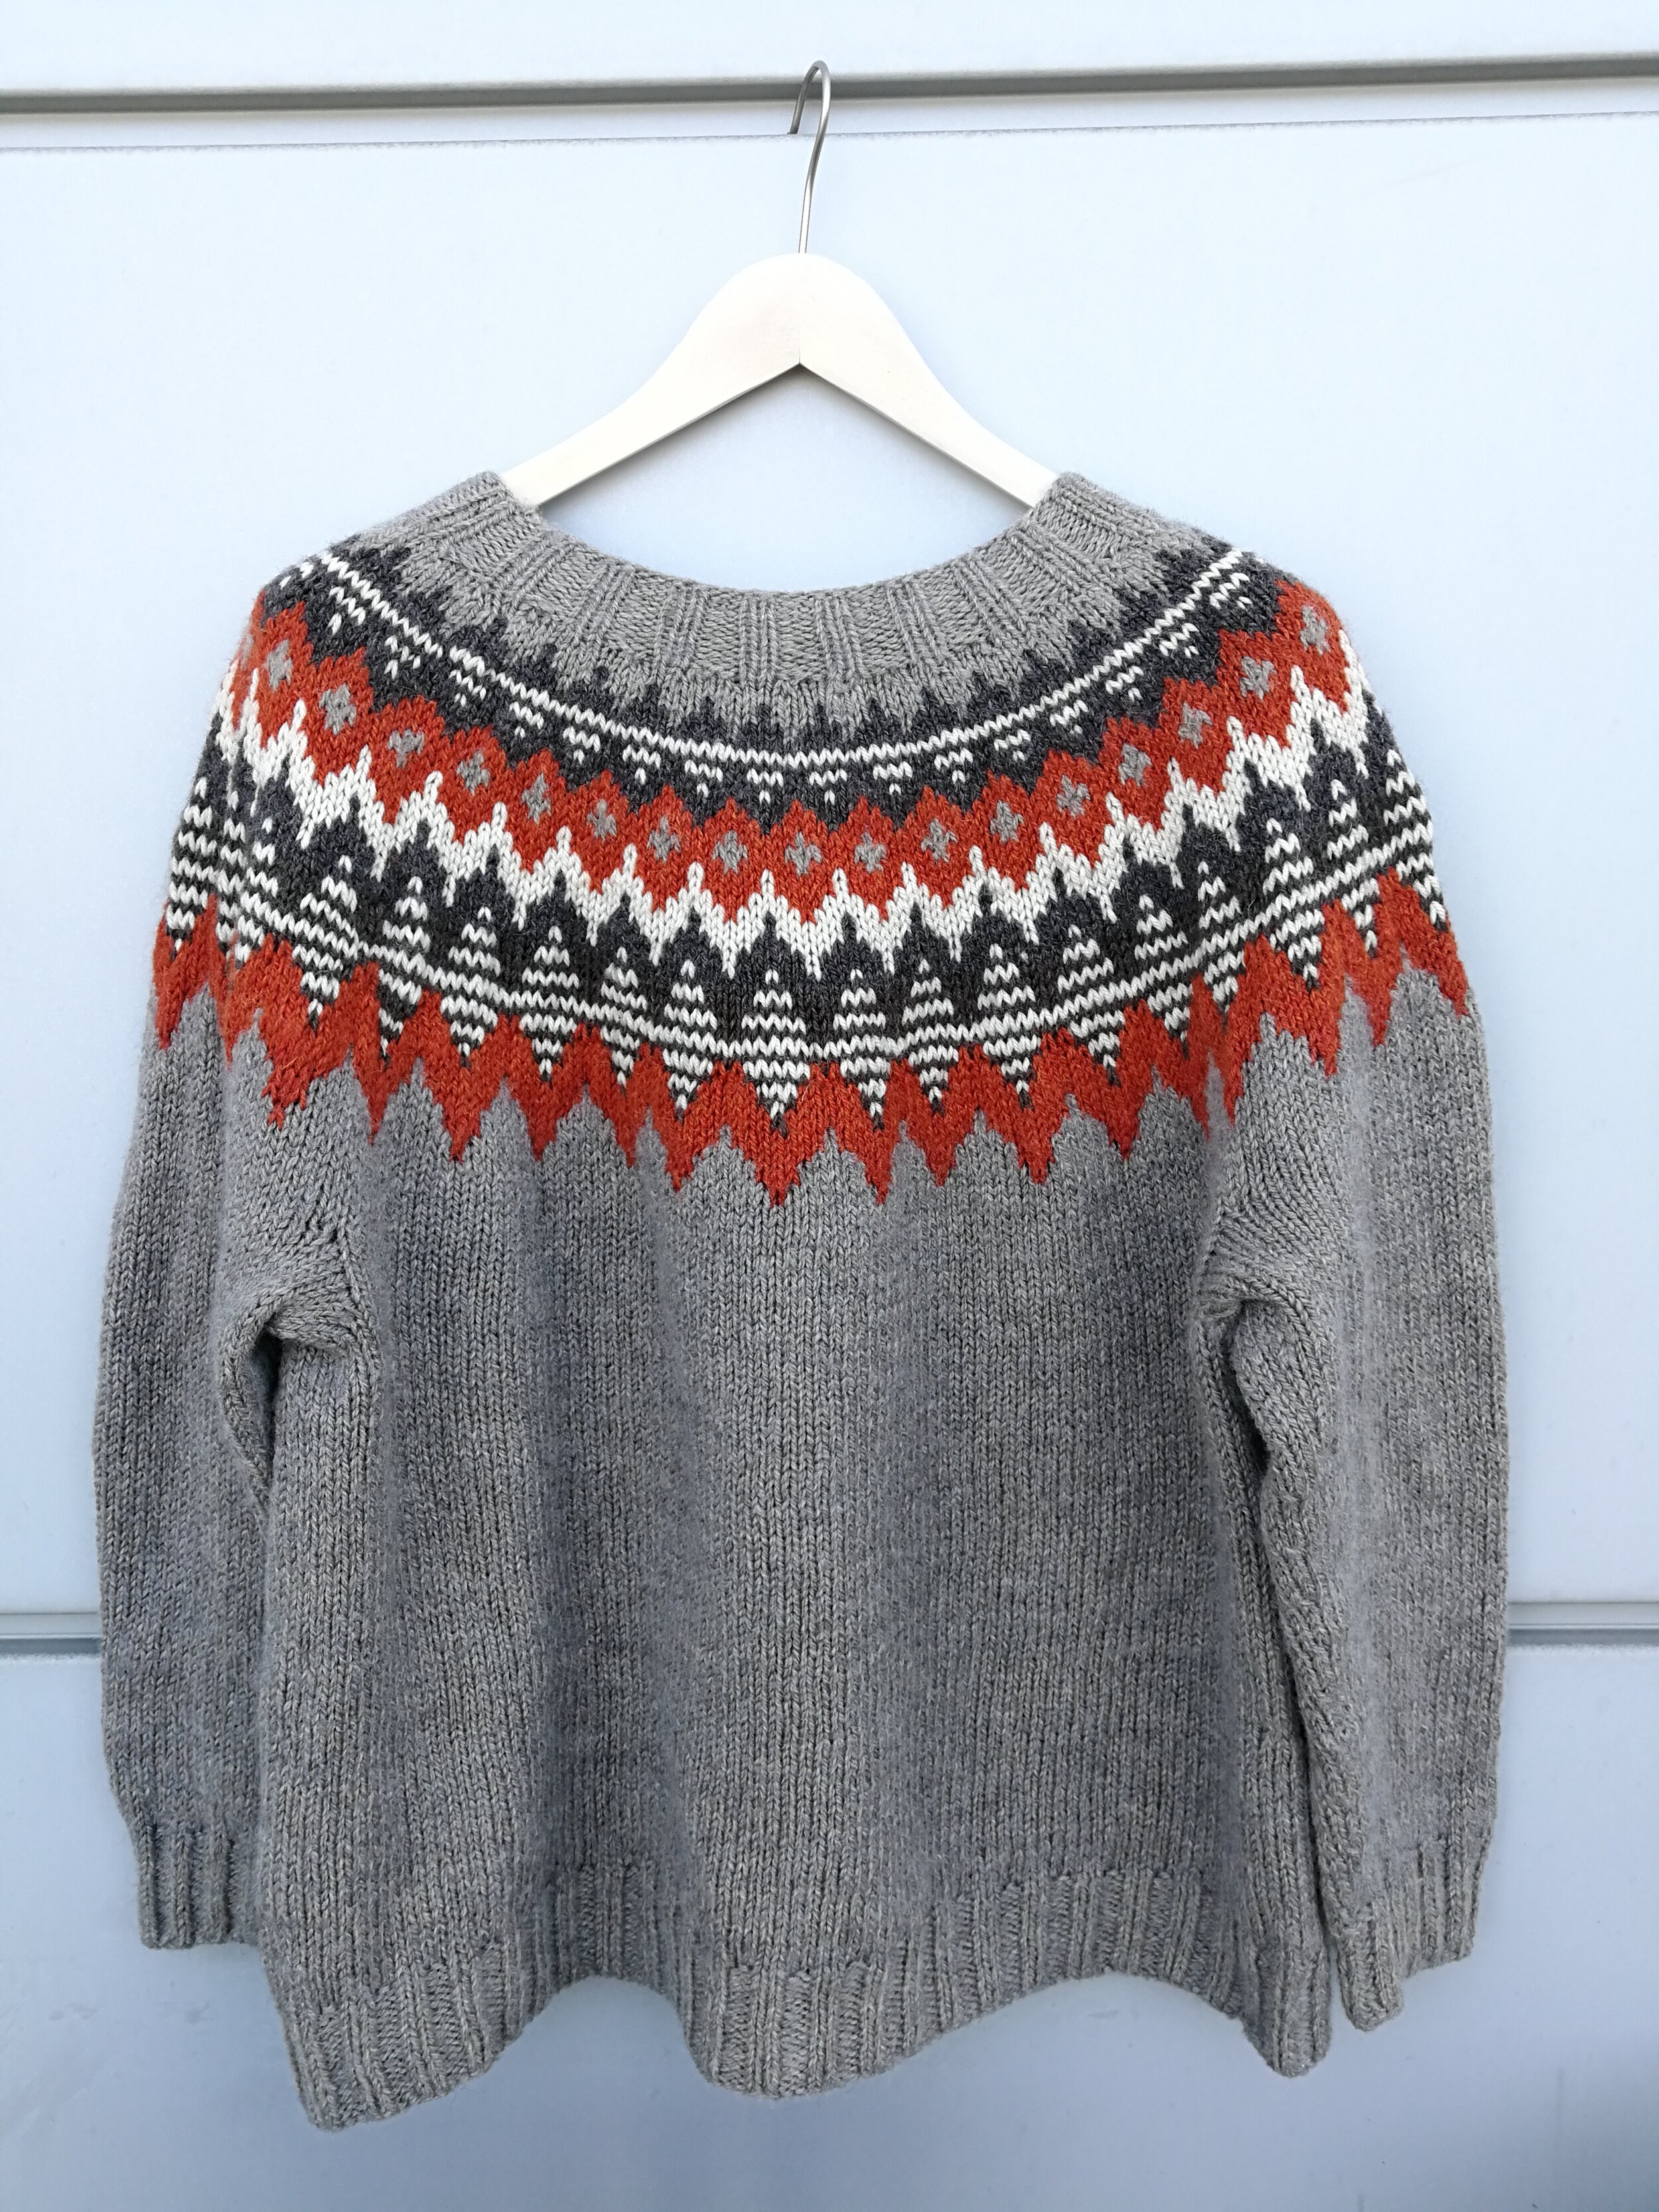 Moon And Turtle Test Knit Projects! — Kiyomi + Sachiko Hand-knit Design